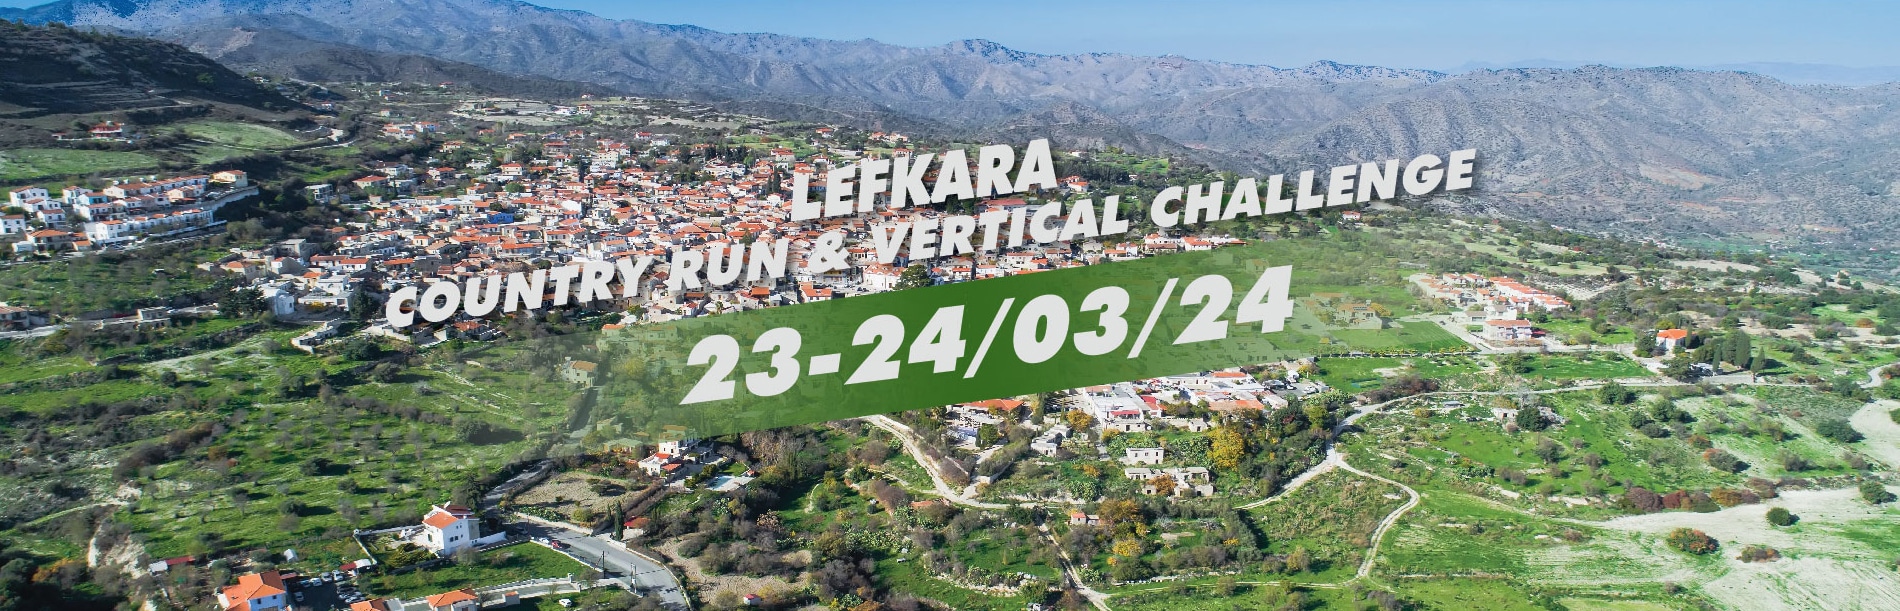 Lefkara Country Run and Vertical Challenge